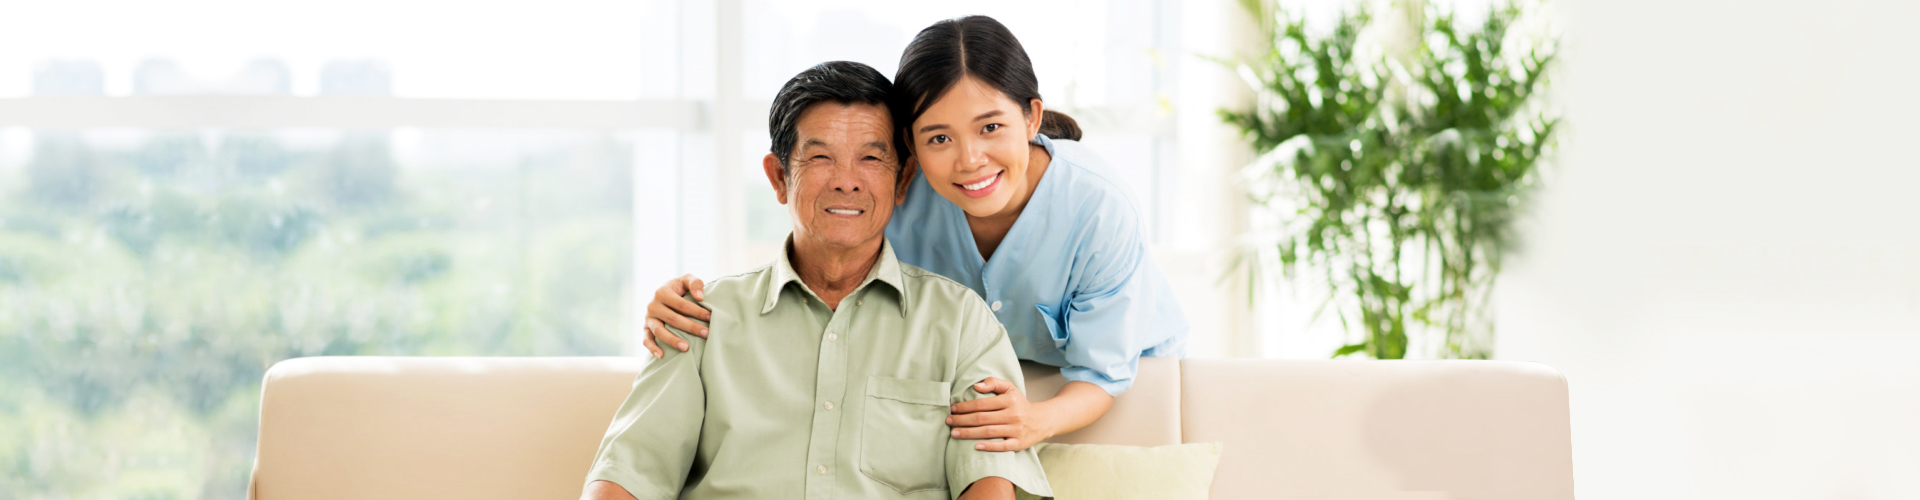 asian caregiver and her old man patient